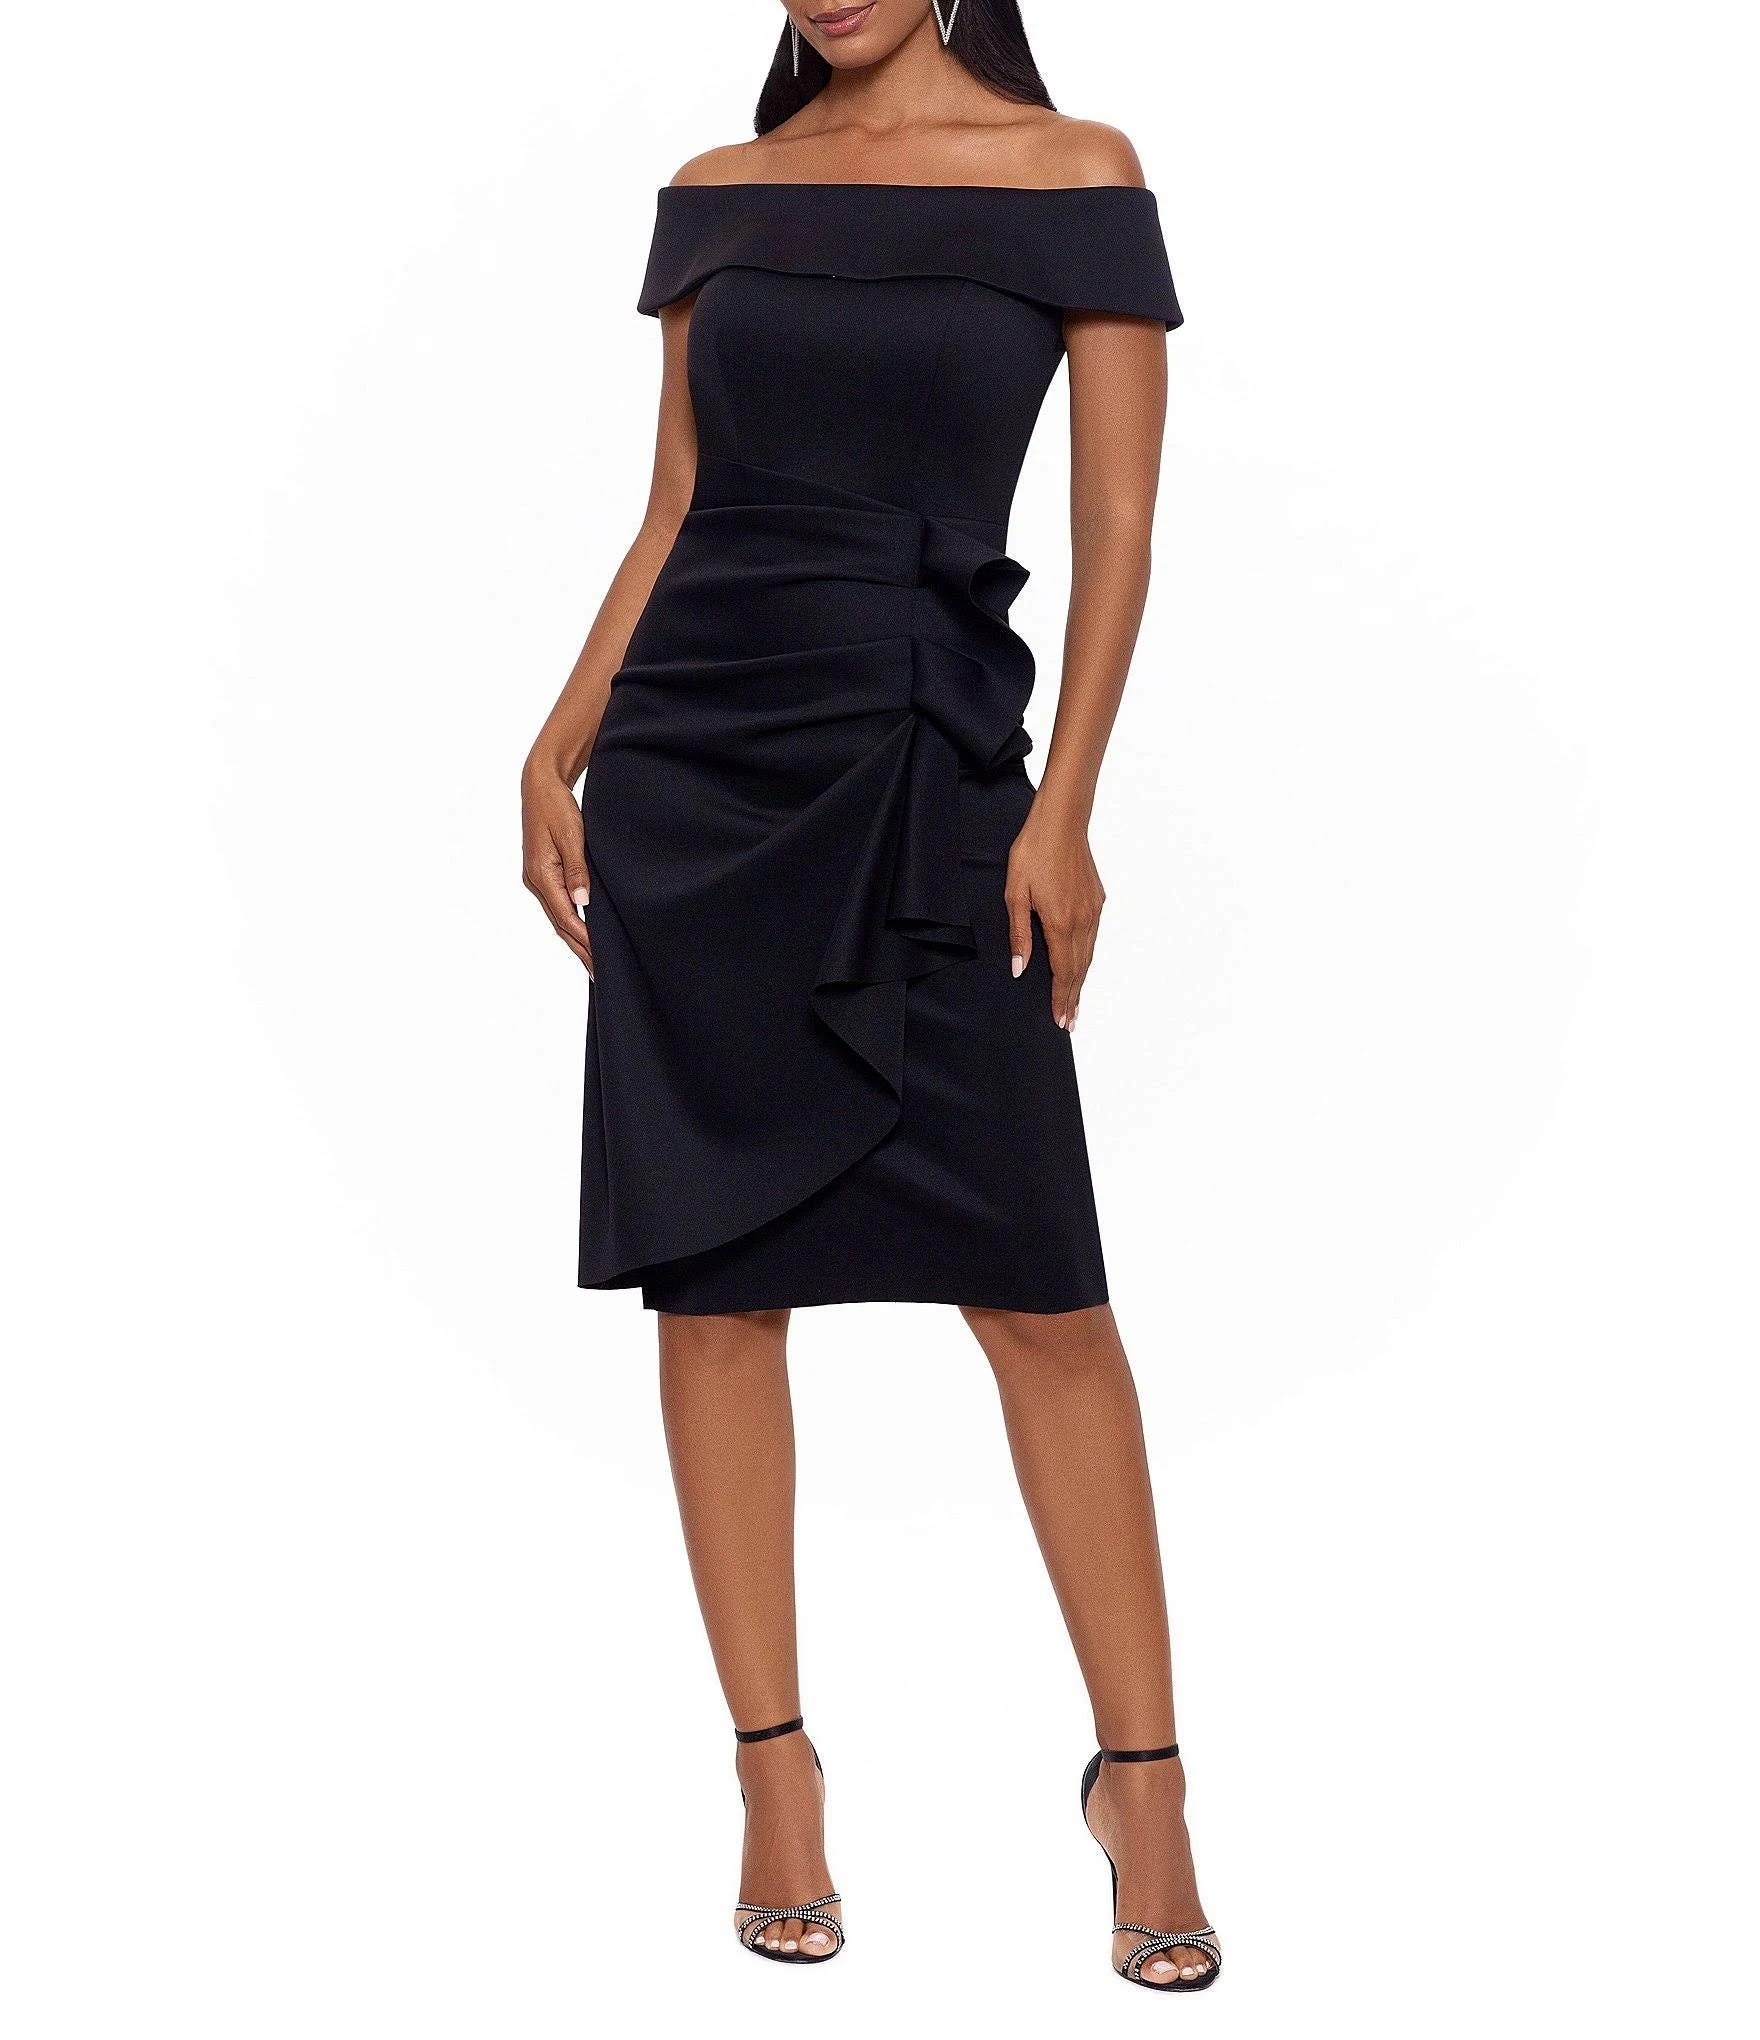 Xscape Women's Ruffled Off-Shoulder Bodycon Dress in Charcoal | Image